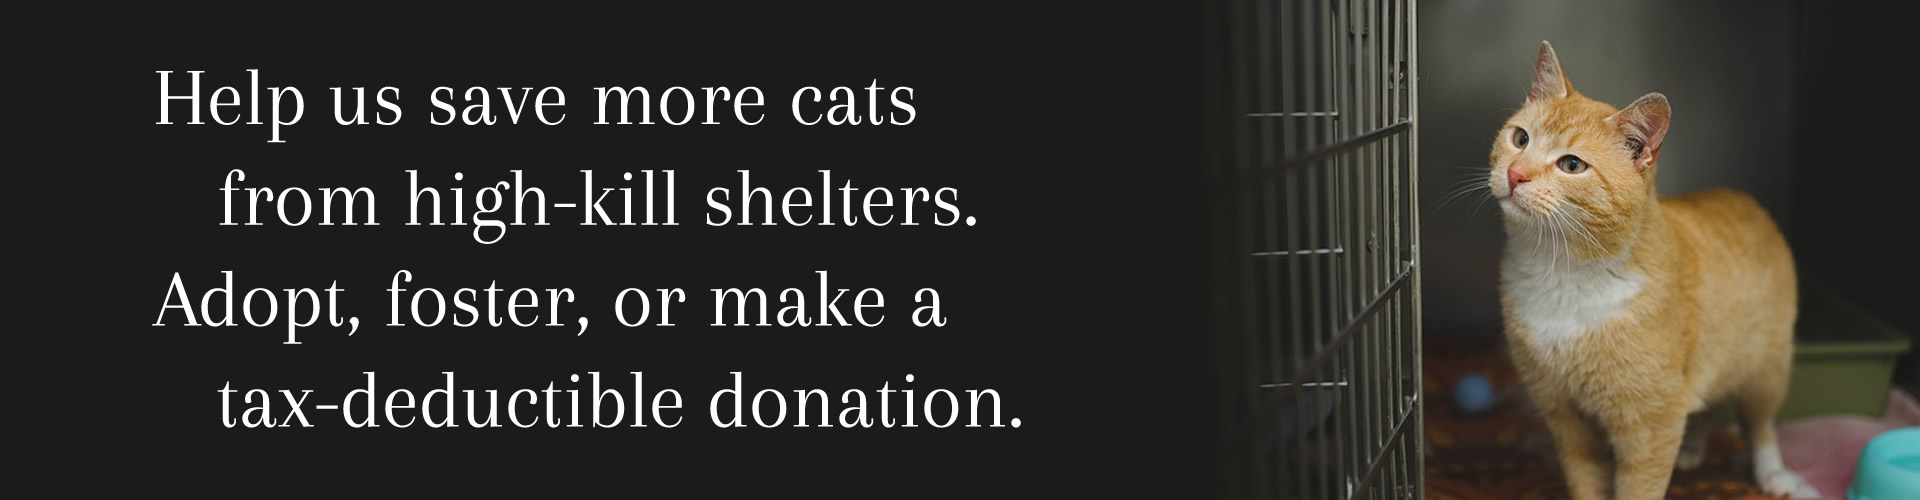 Help us save more kittens from kill shelters. Adopt, foster, or make a tax-deductible donation.